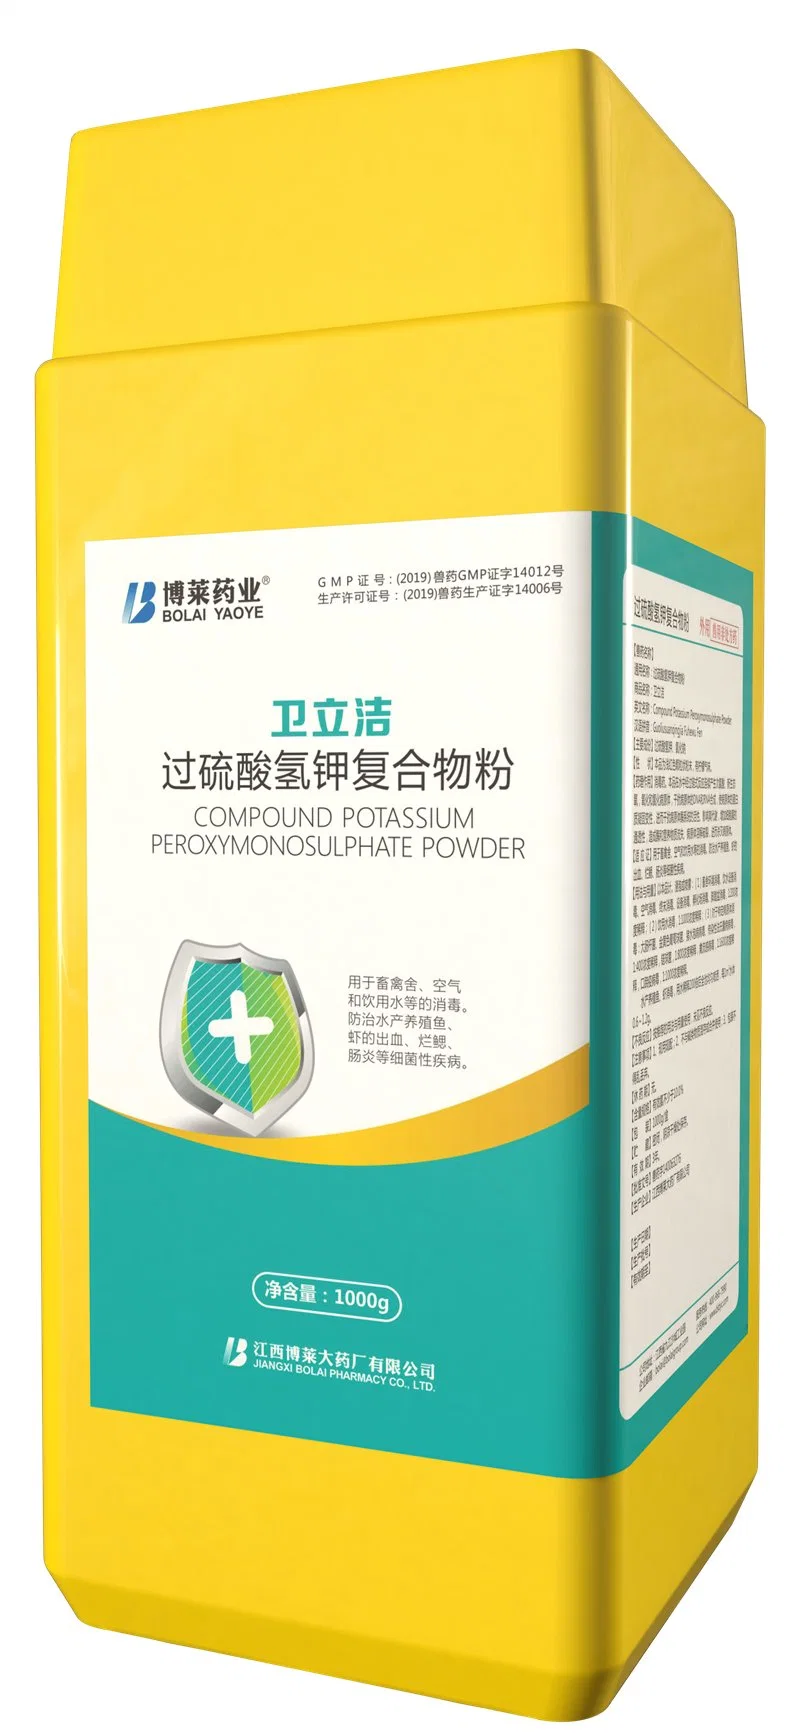 Peroxymonosulphate for Veterinary Use Only